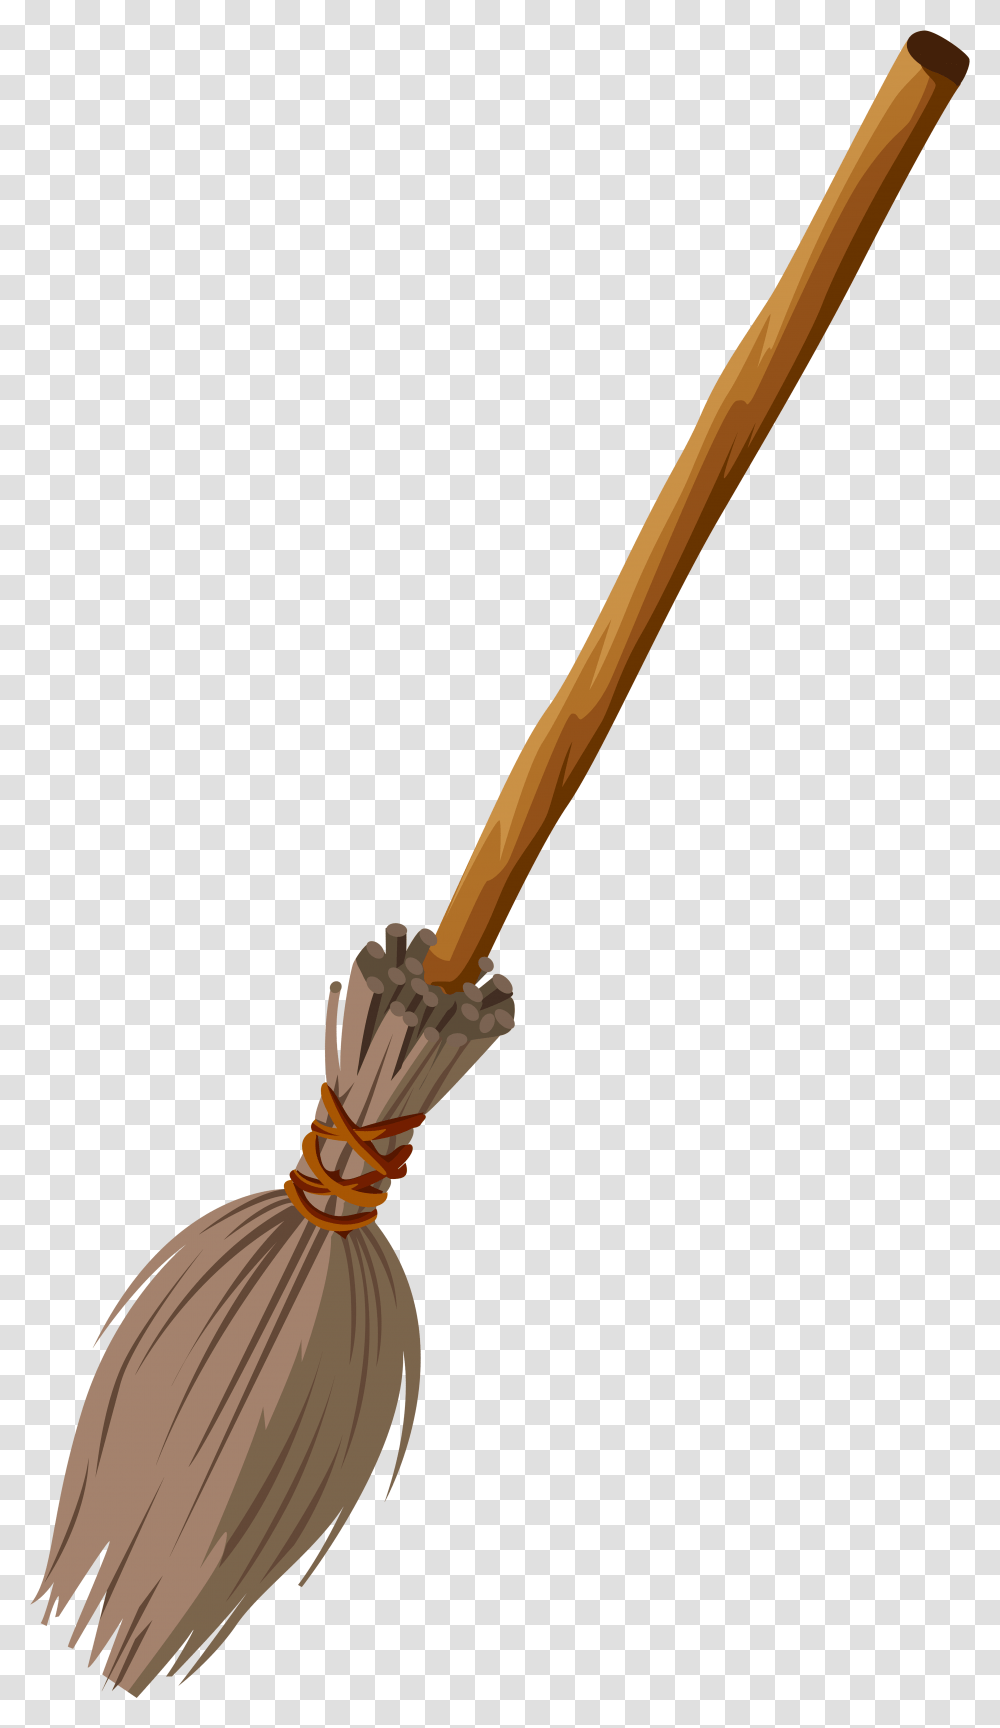 Witch Broom Clip Art Image Harry Potter Broom Clipart, Lute Transparent Png